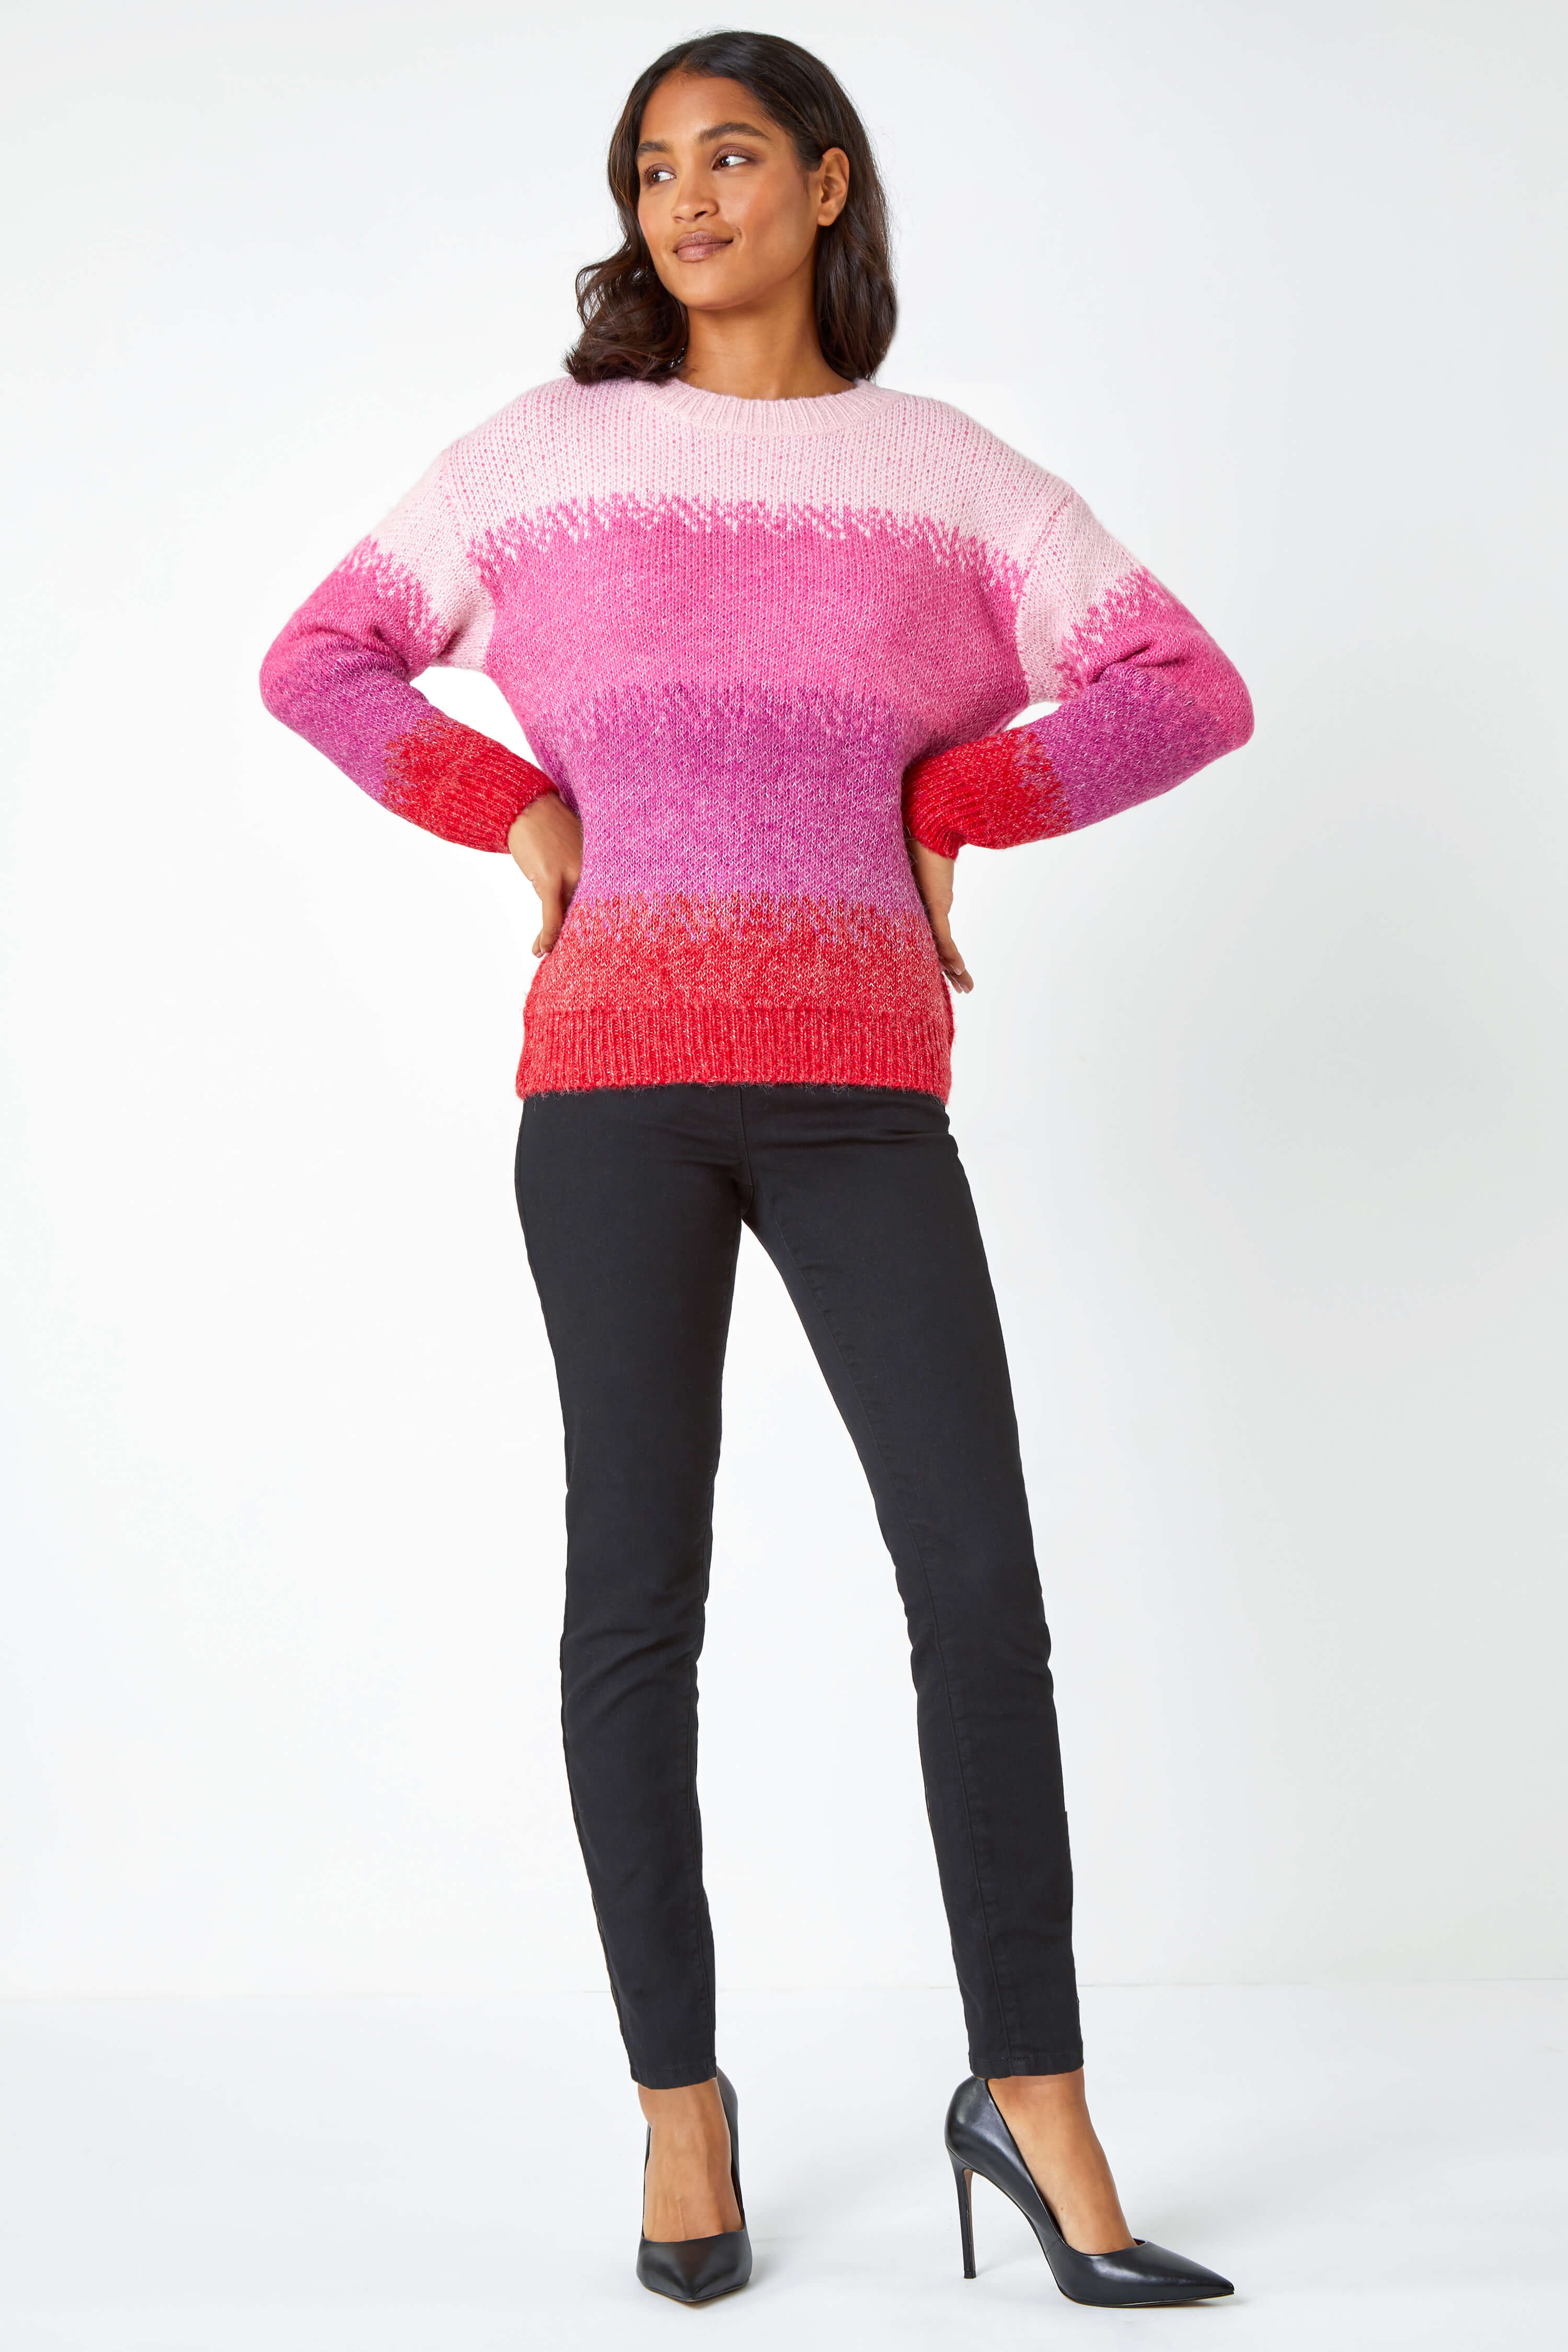 PINK Stripe Print Knitted Jumper, Image 2 of 5